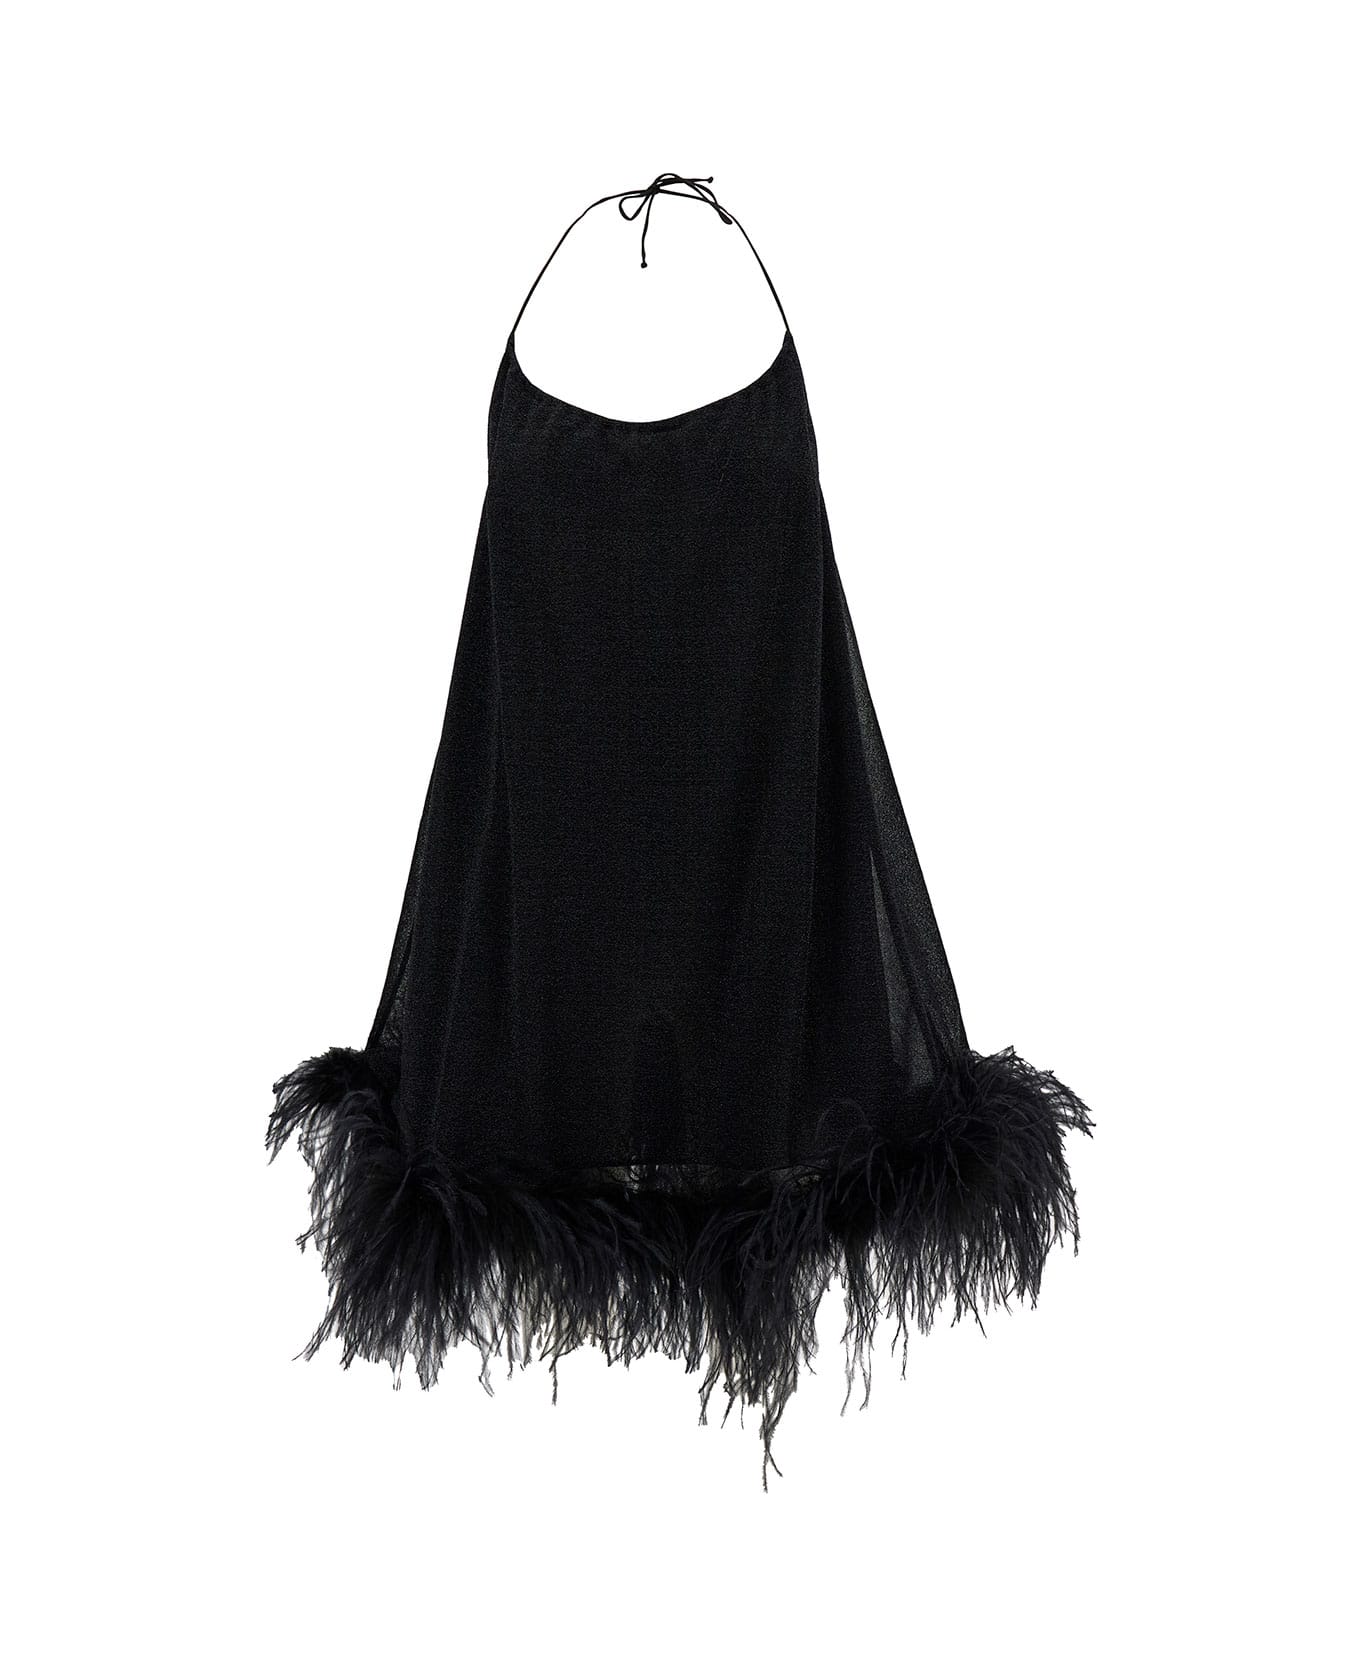 Oseree Mini Black Dress With Halterneck And Feathers In Polyamide Blend Woman - Black